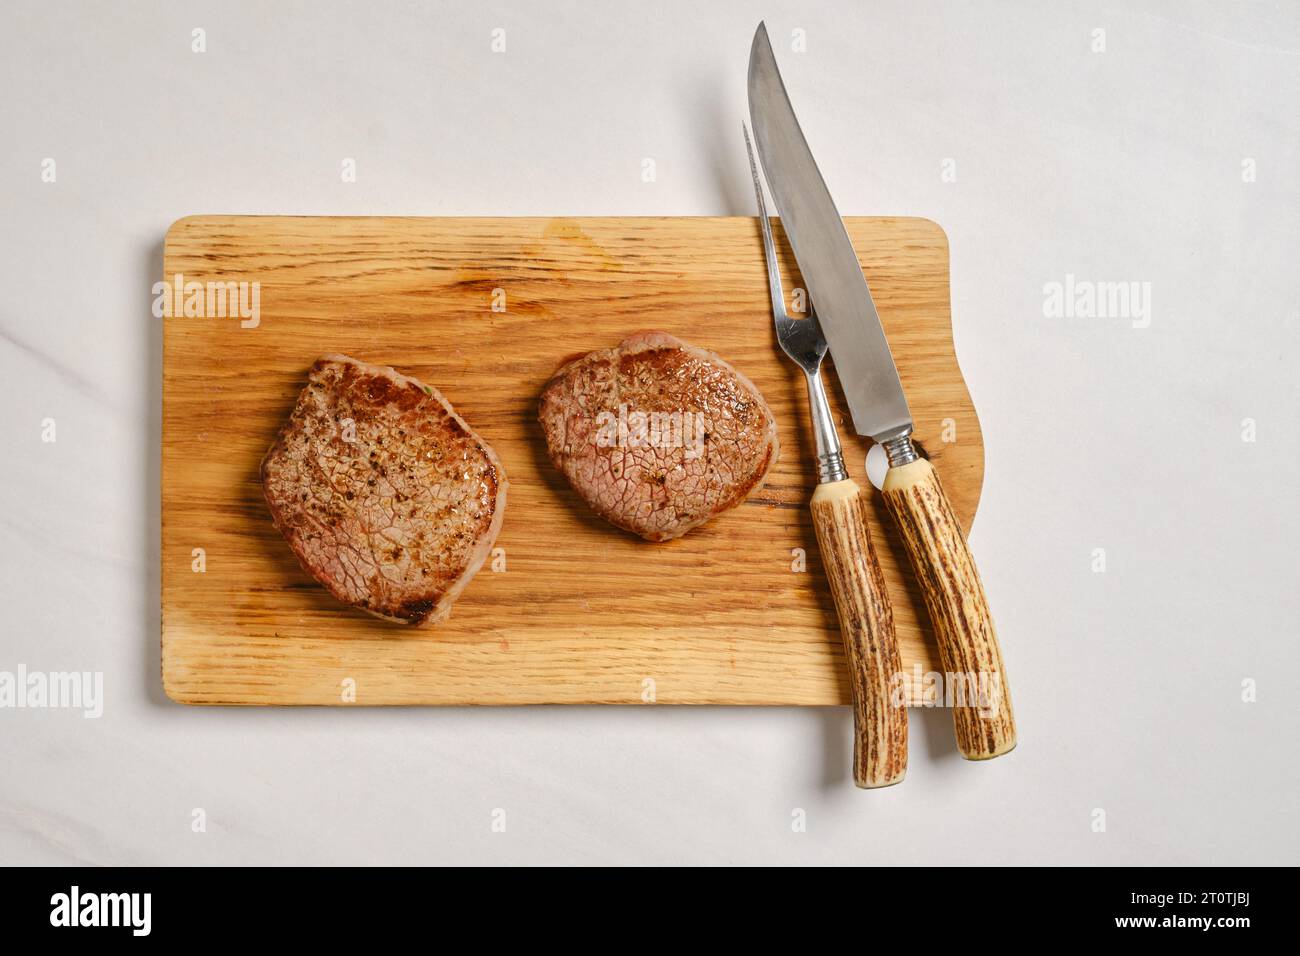 Top view of juicy beef steak on wooden cutting board next to fork and knife Stock Photo